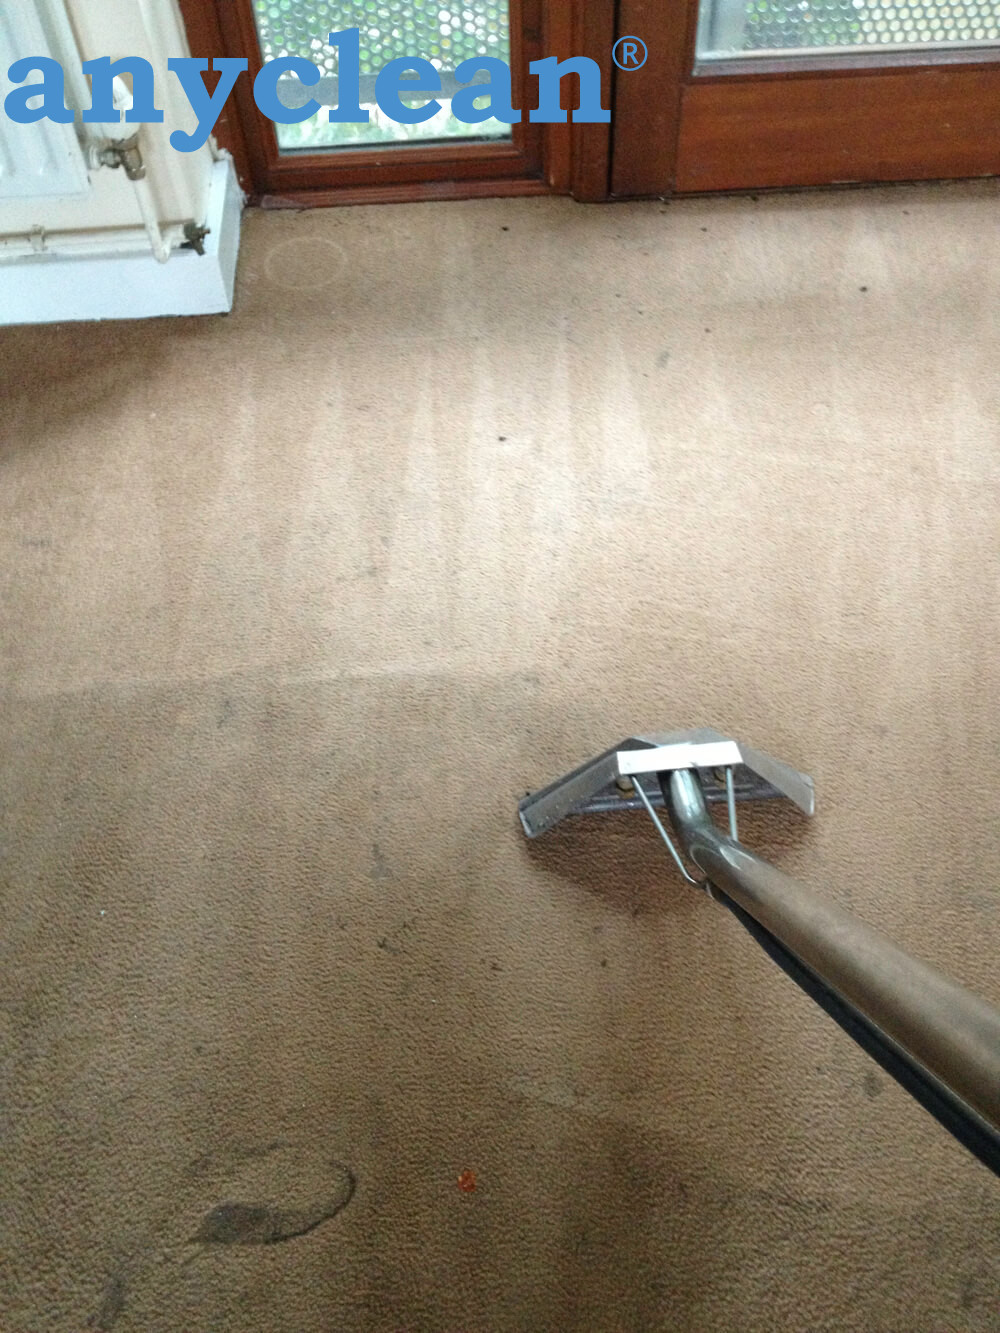 Your trusted carpet cleaning provider near GR56 HV London, United Kingdom